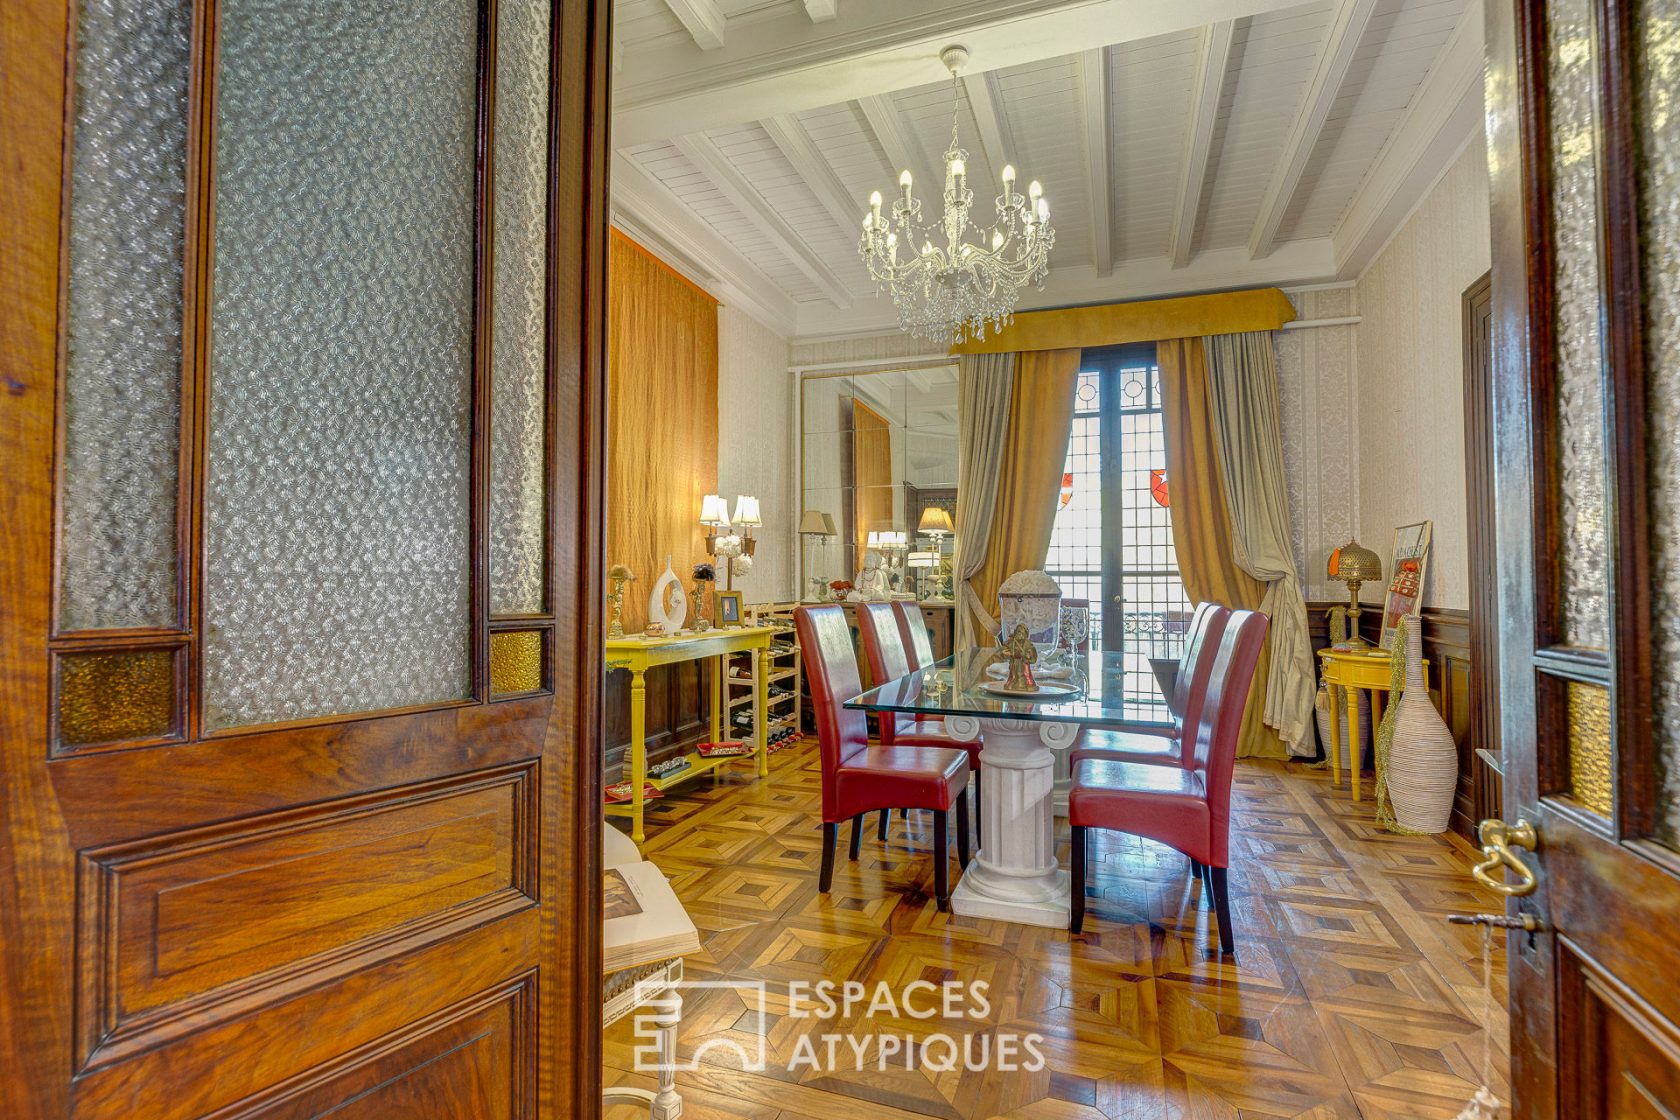 Renovated Haussmann-style apartment in the heart of the city